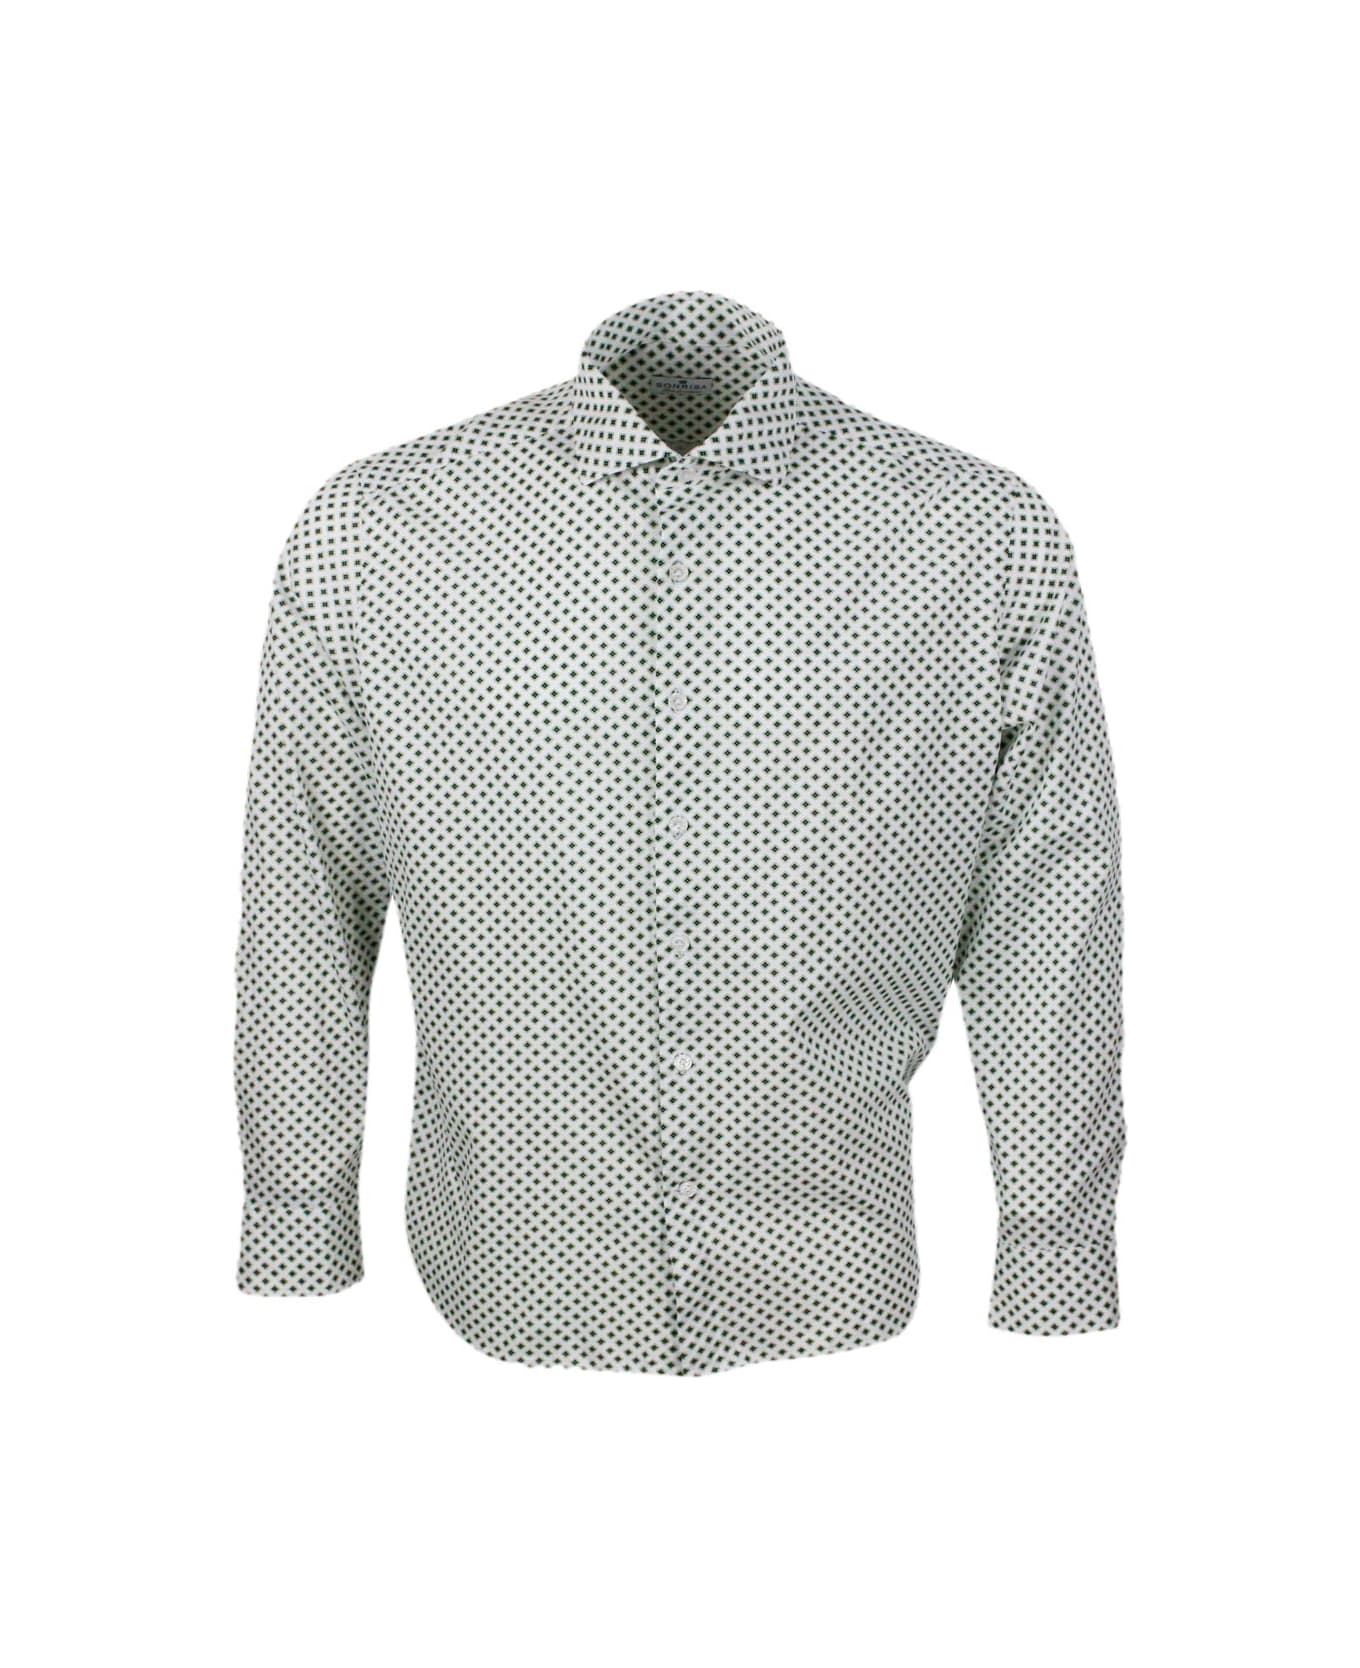 Sonrisa Luxury Shirt In Soft, Precious And Very Fine Stretch Cotton Flower With French Collar In A Small Four-leaf Clover Micro-pattern Print - White